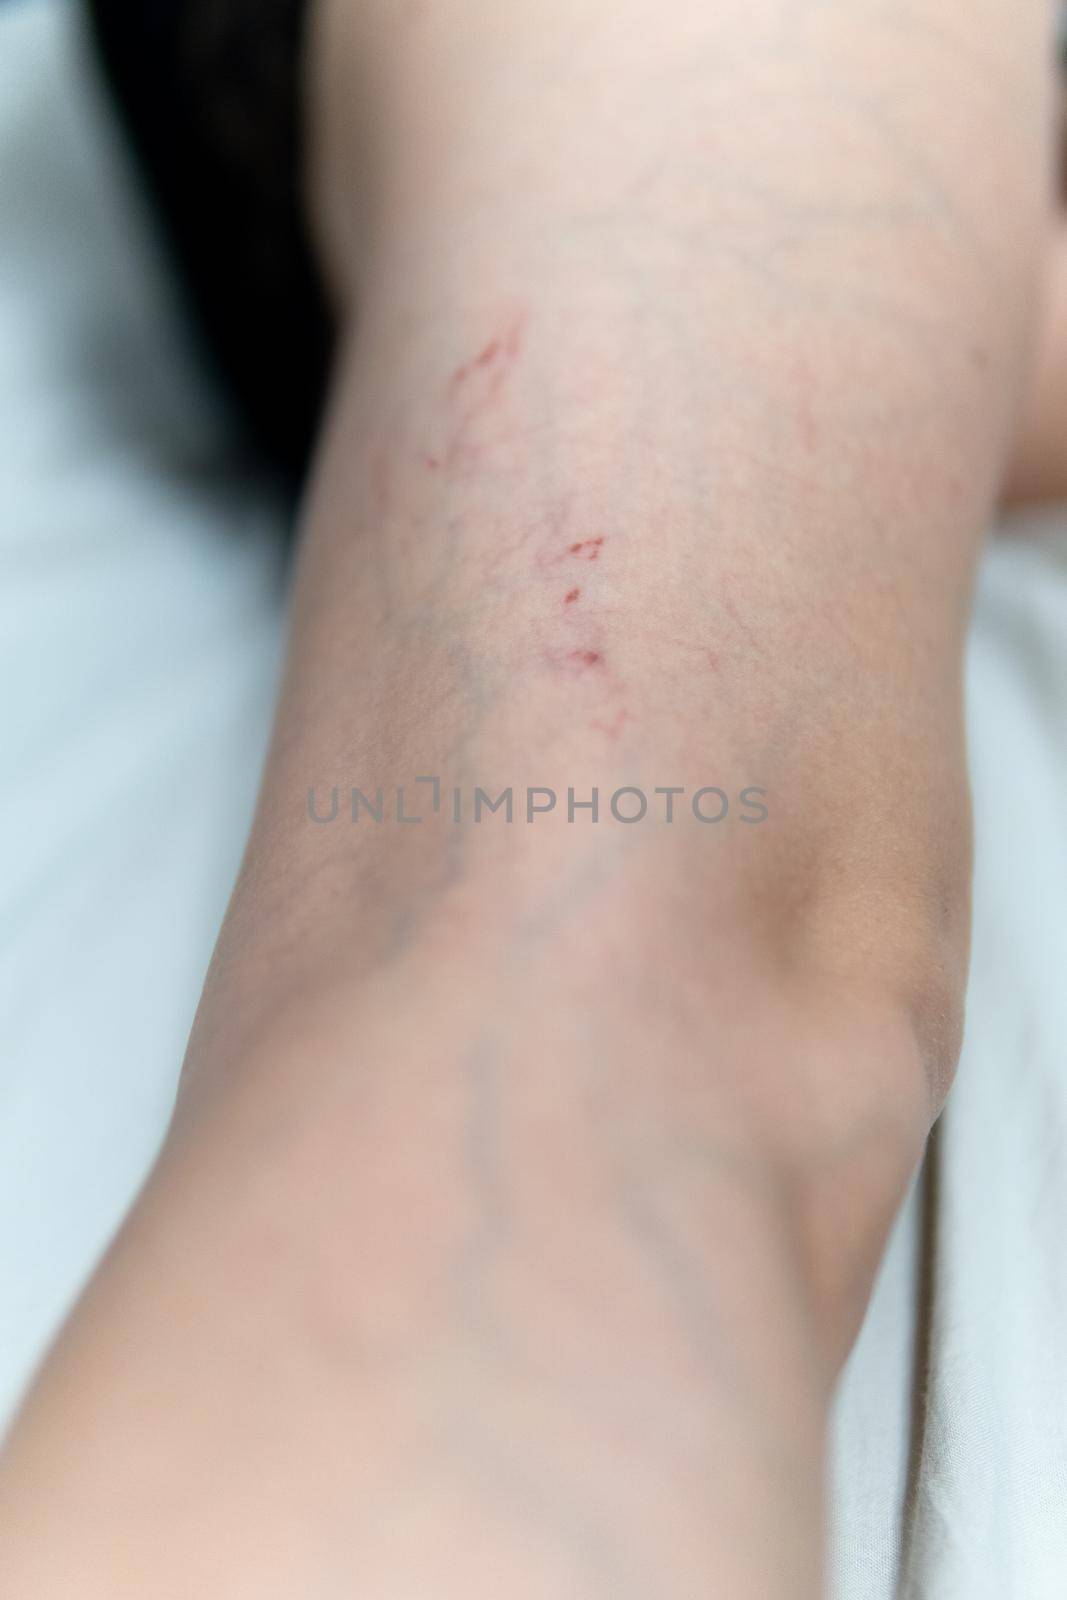 removal of blood vessels by laser vessel blood, varicose treatment care health therapy, veins pathology. Help risk enlarged, tortuous telangiectases physical